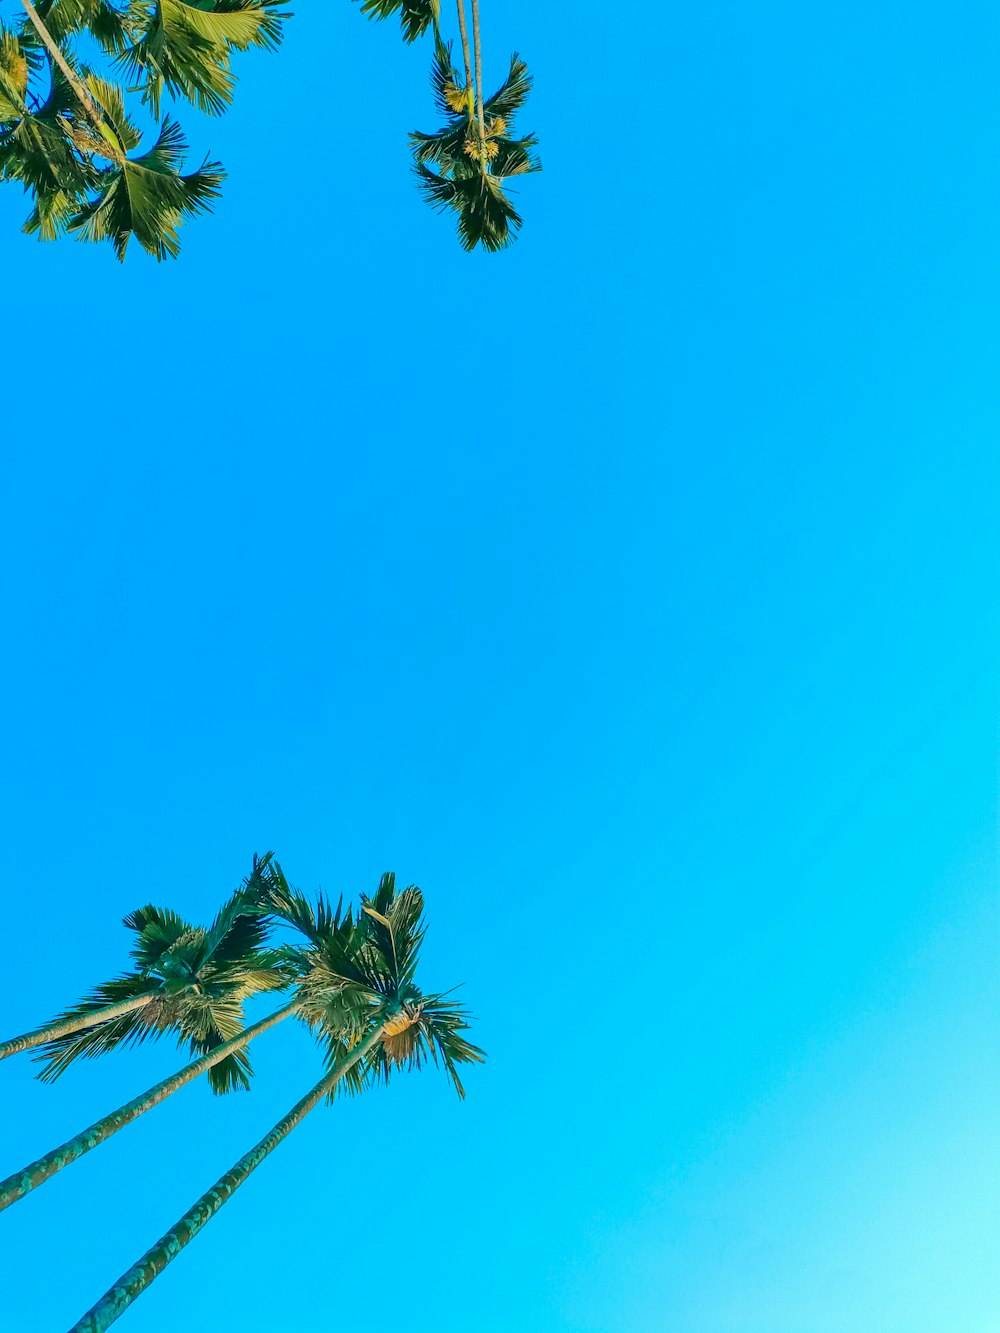 a clear blue sky with palm trees in the foreground